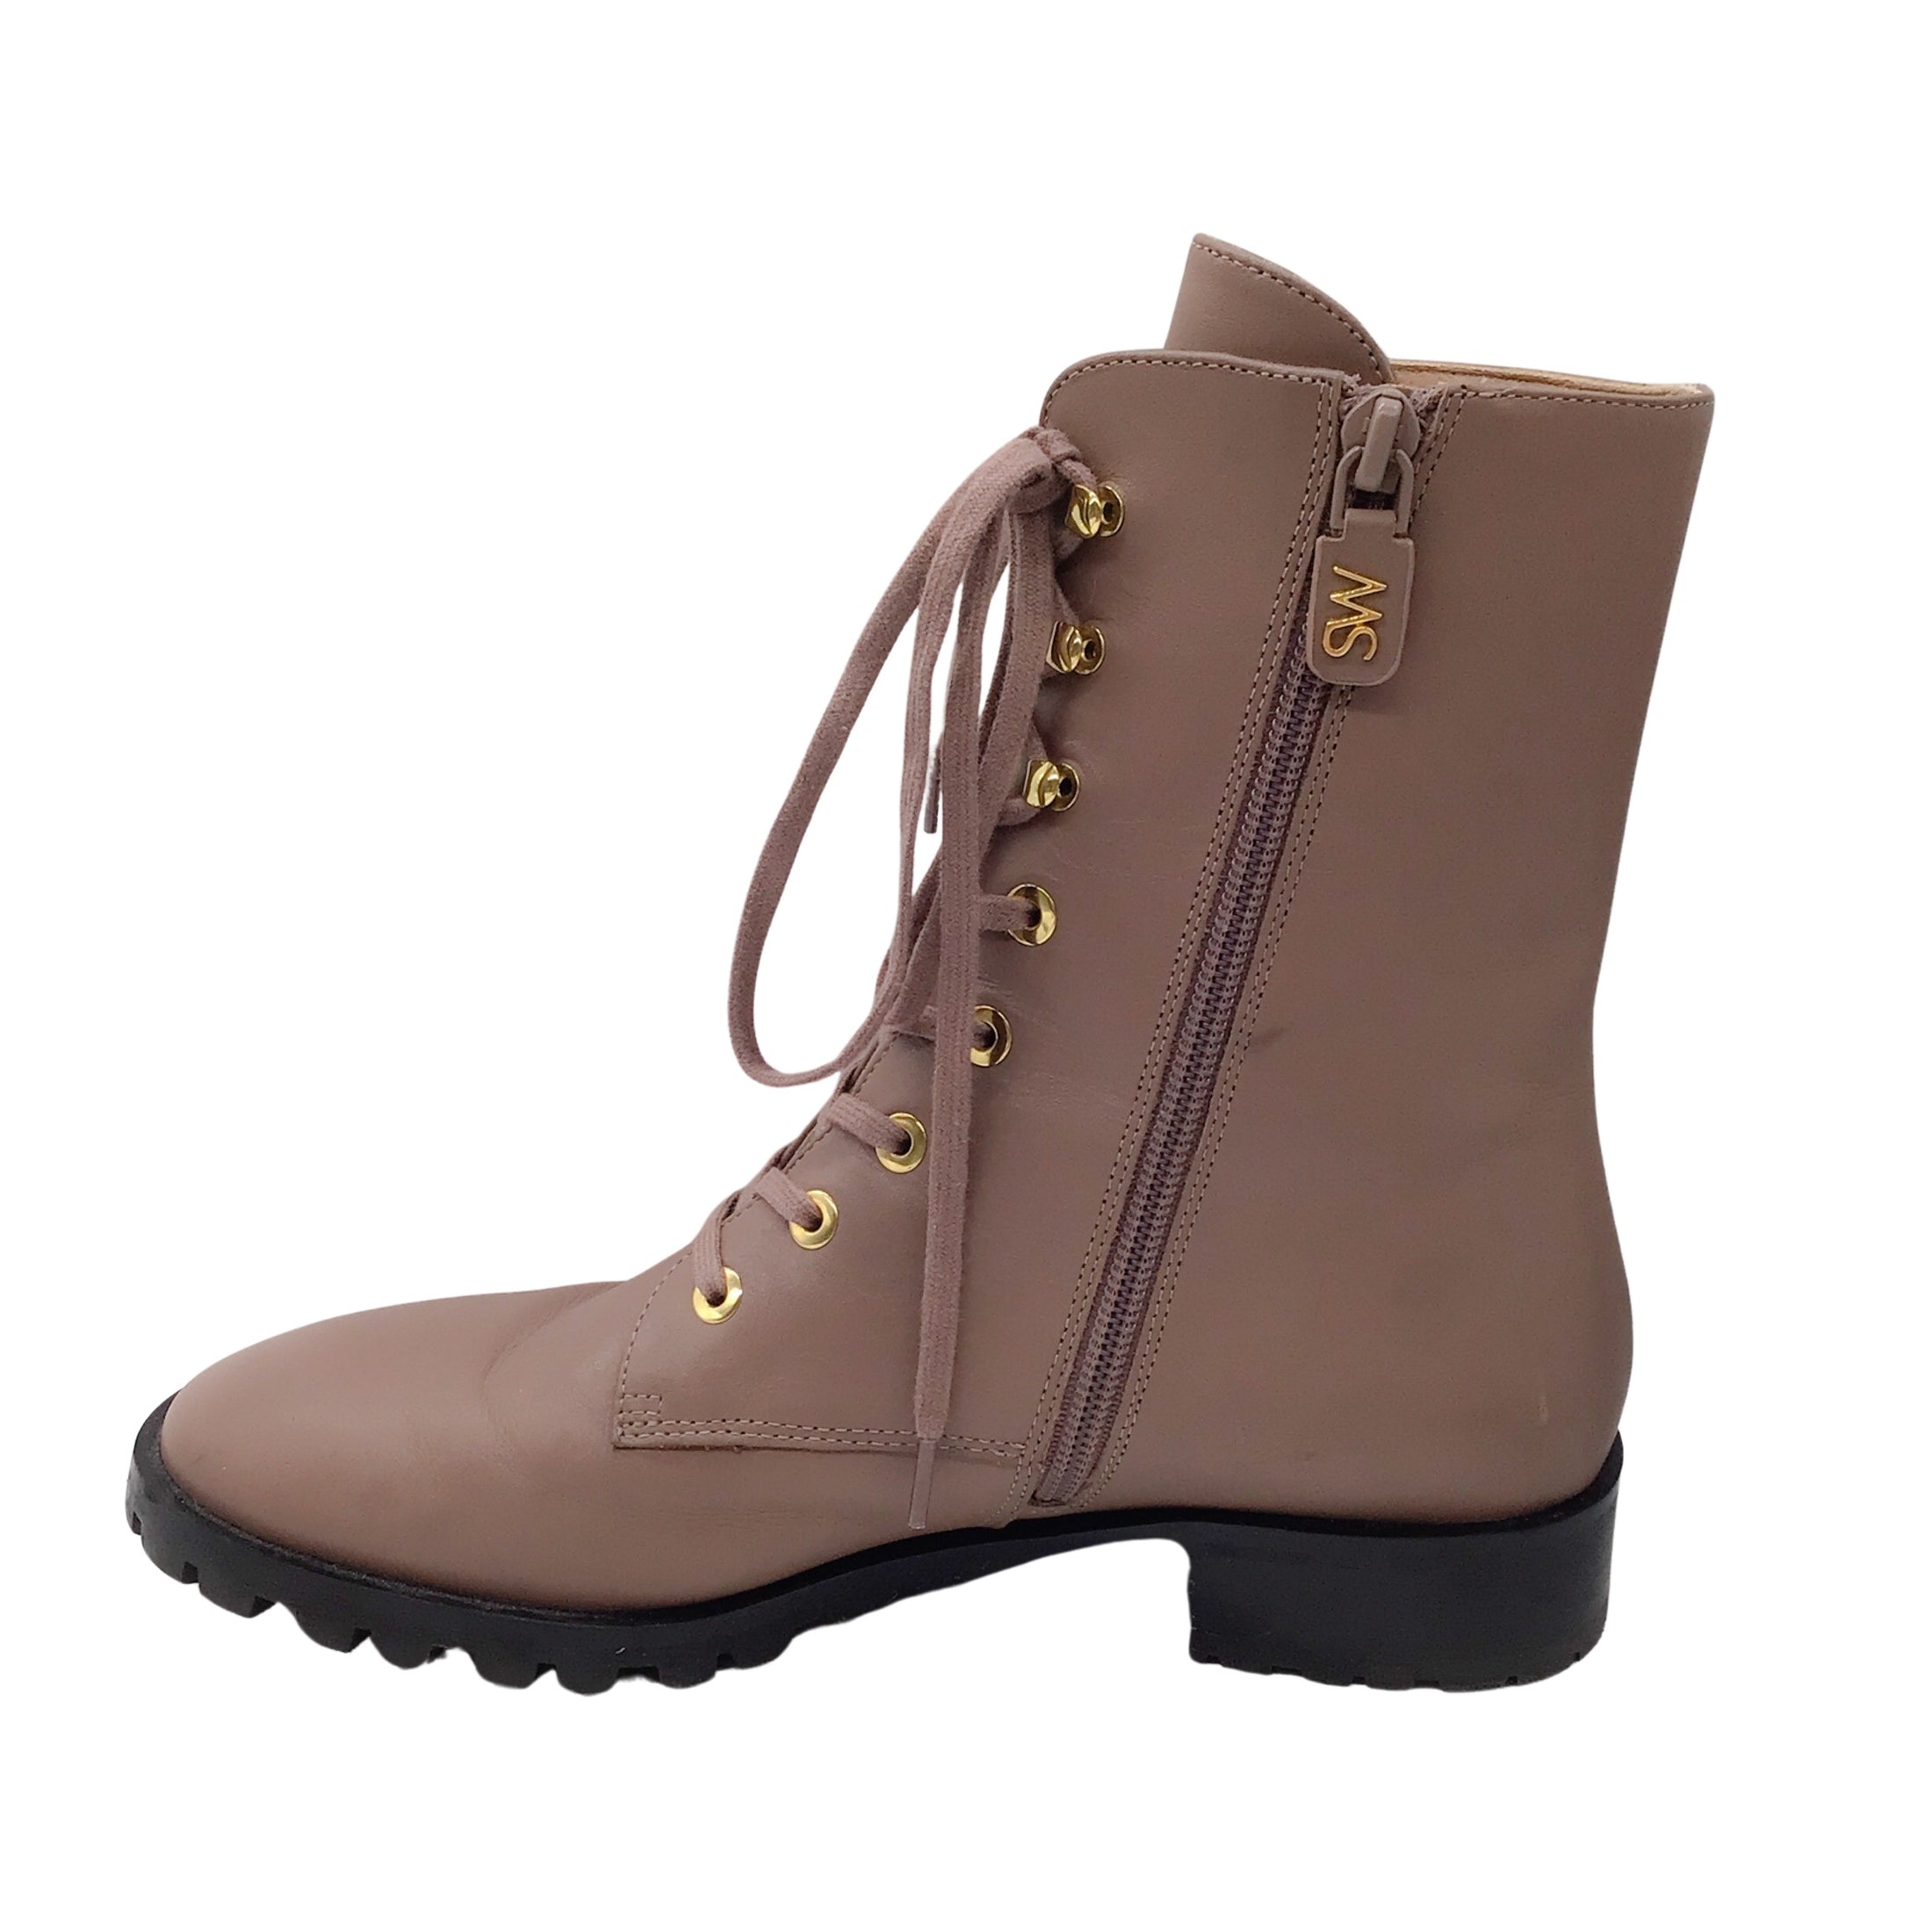 Stuart Weitzman Taupe Lace-Up Leather Boots